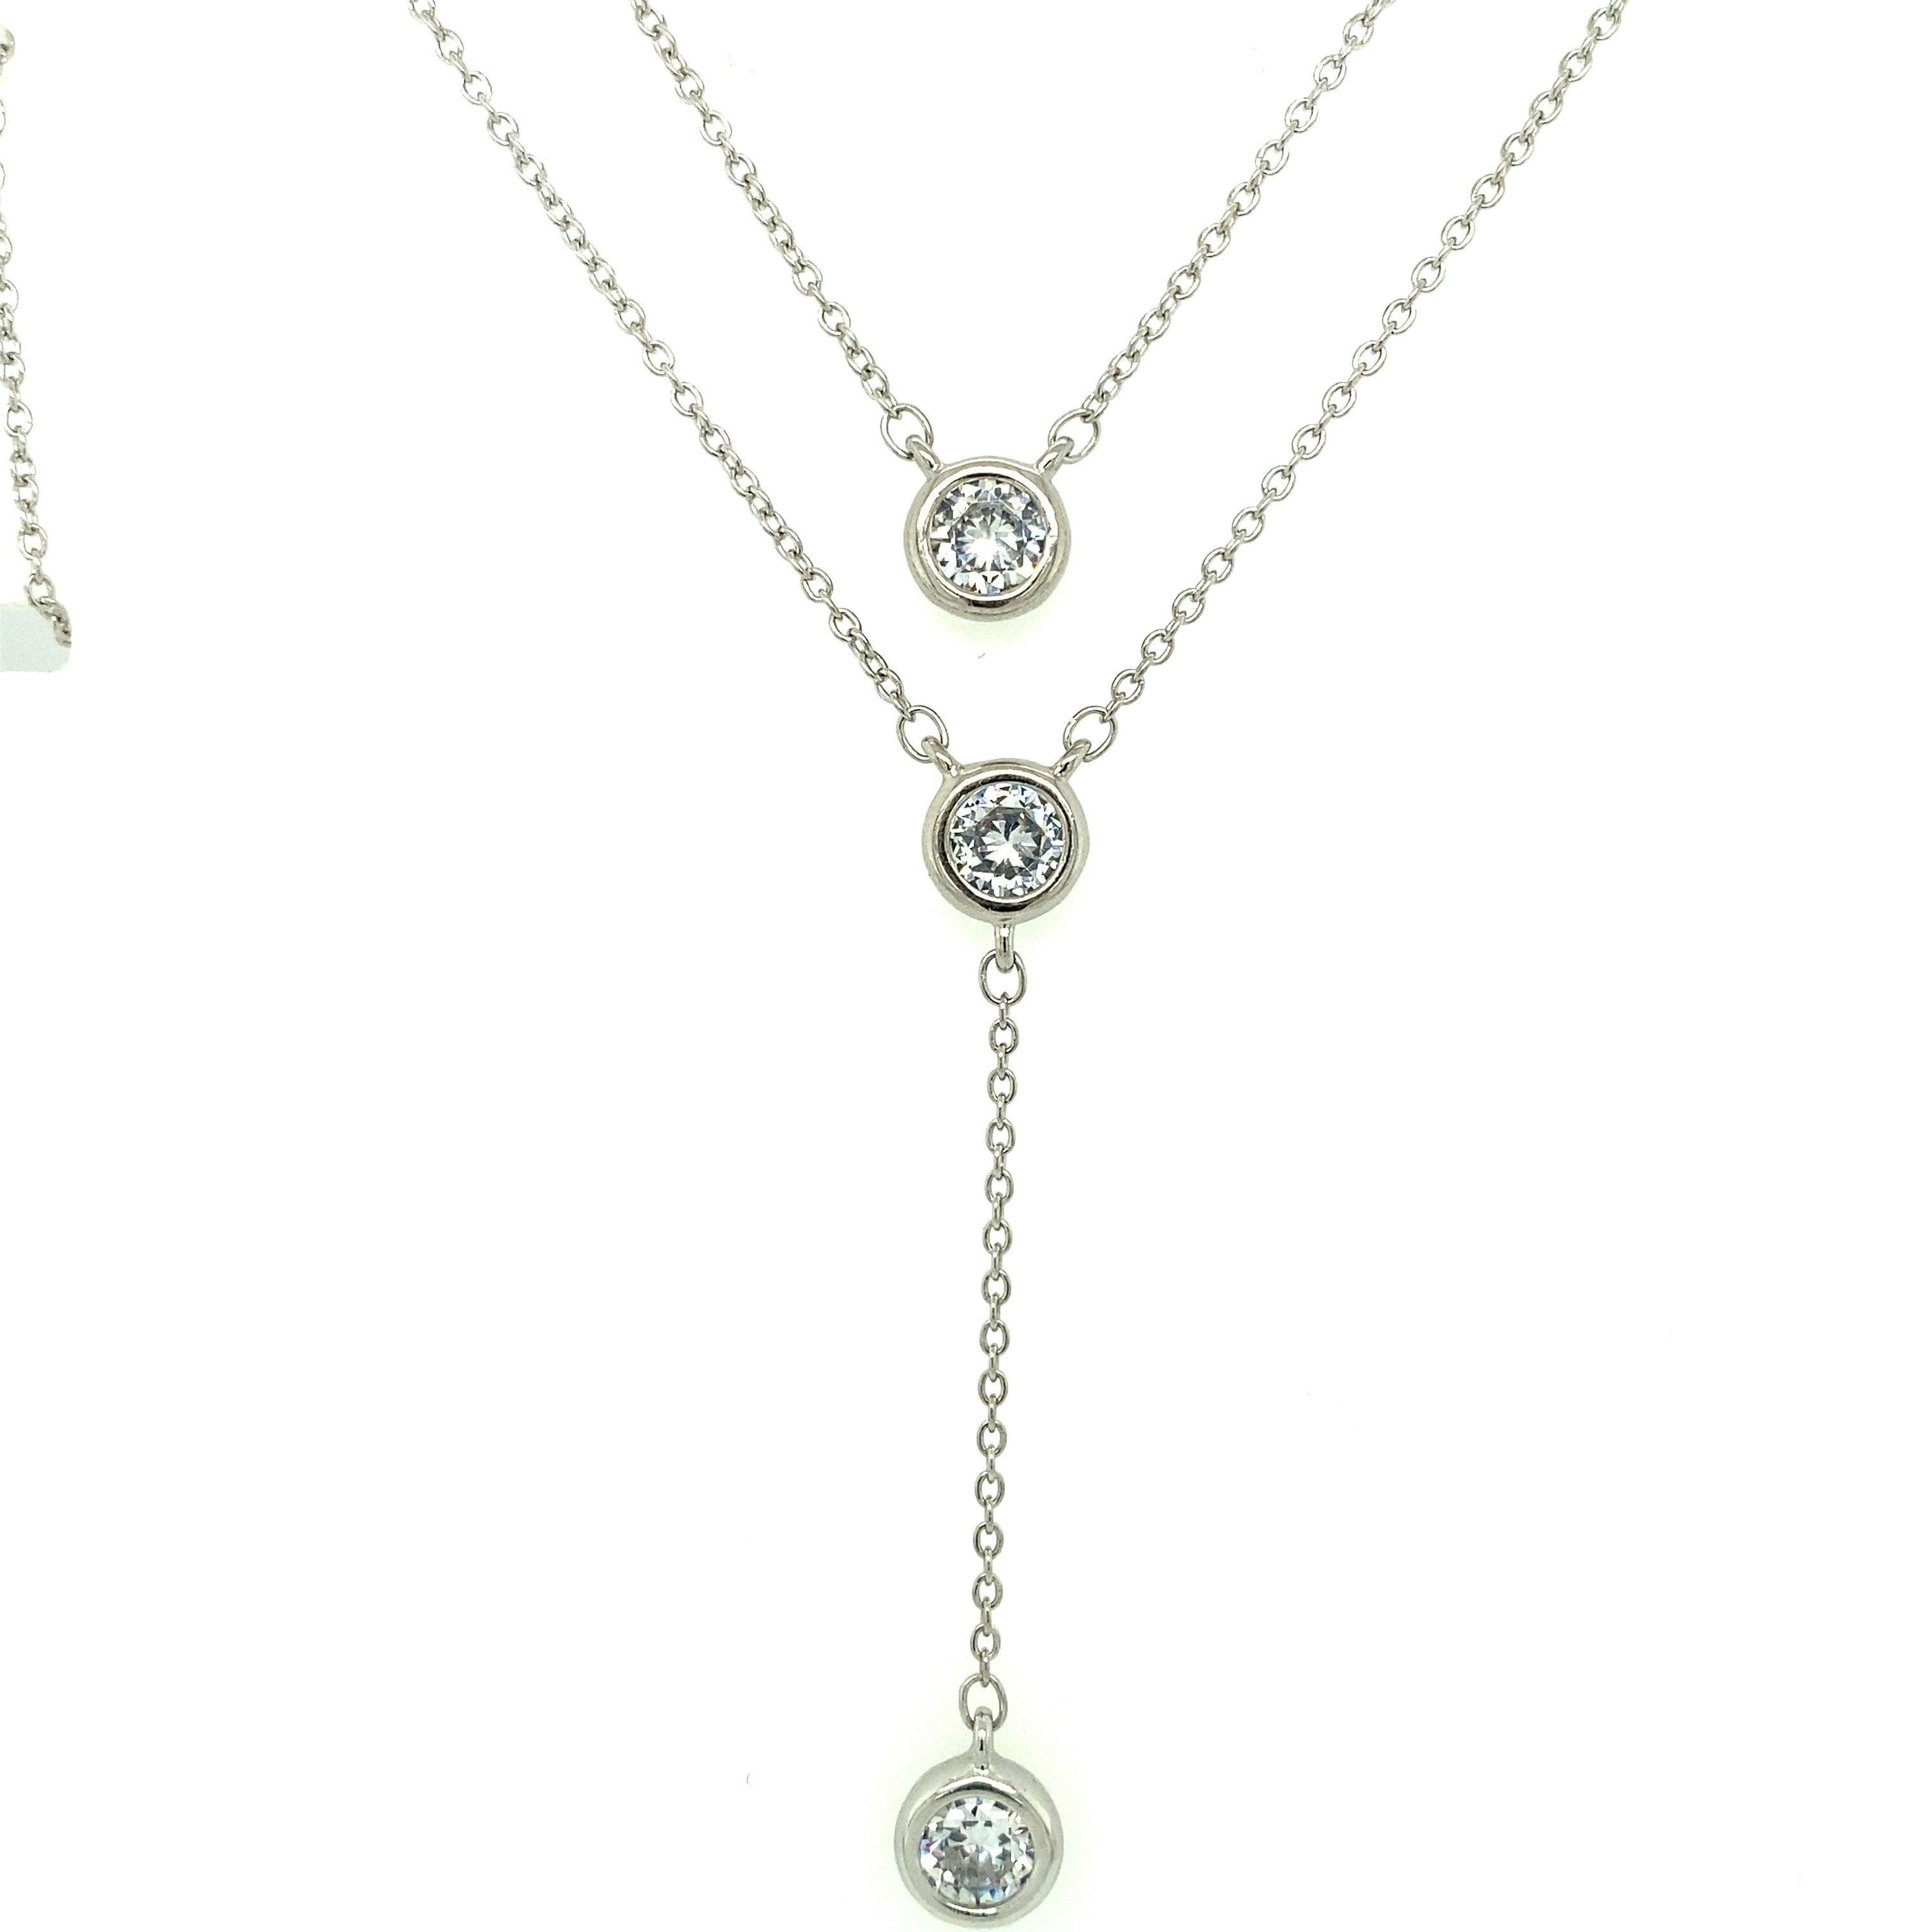 Asfour Crystal Silver Accessories Necklace N1654 - 925 Sterling Silver